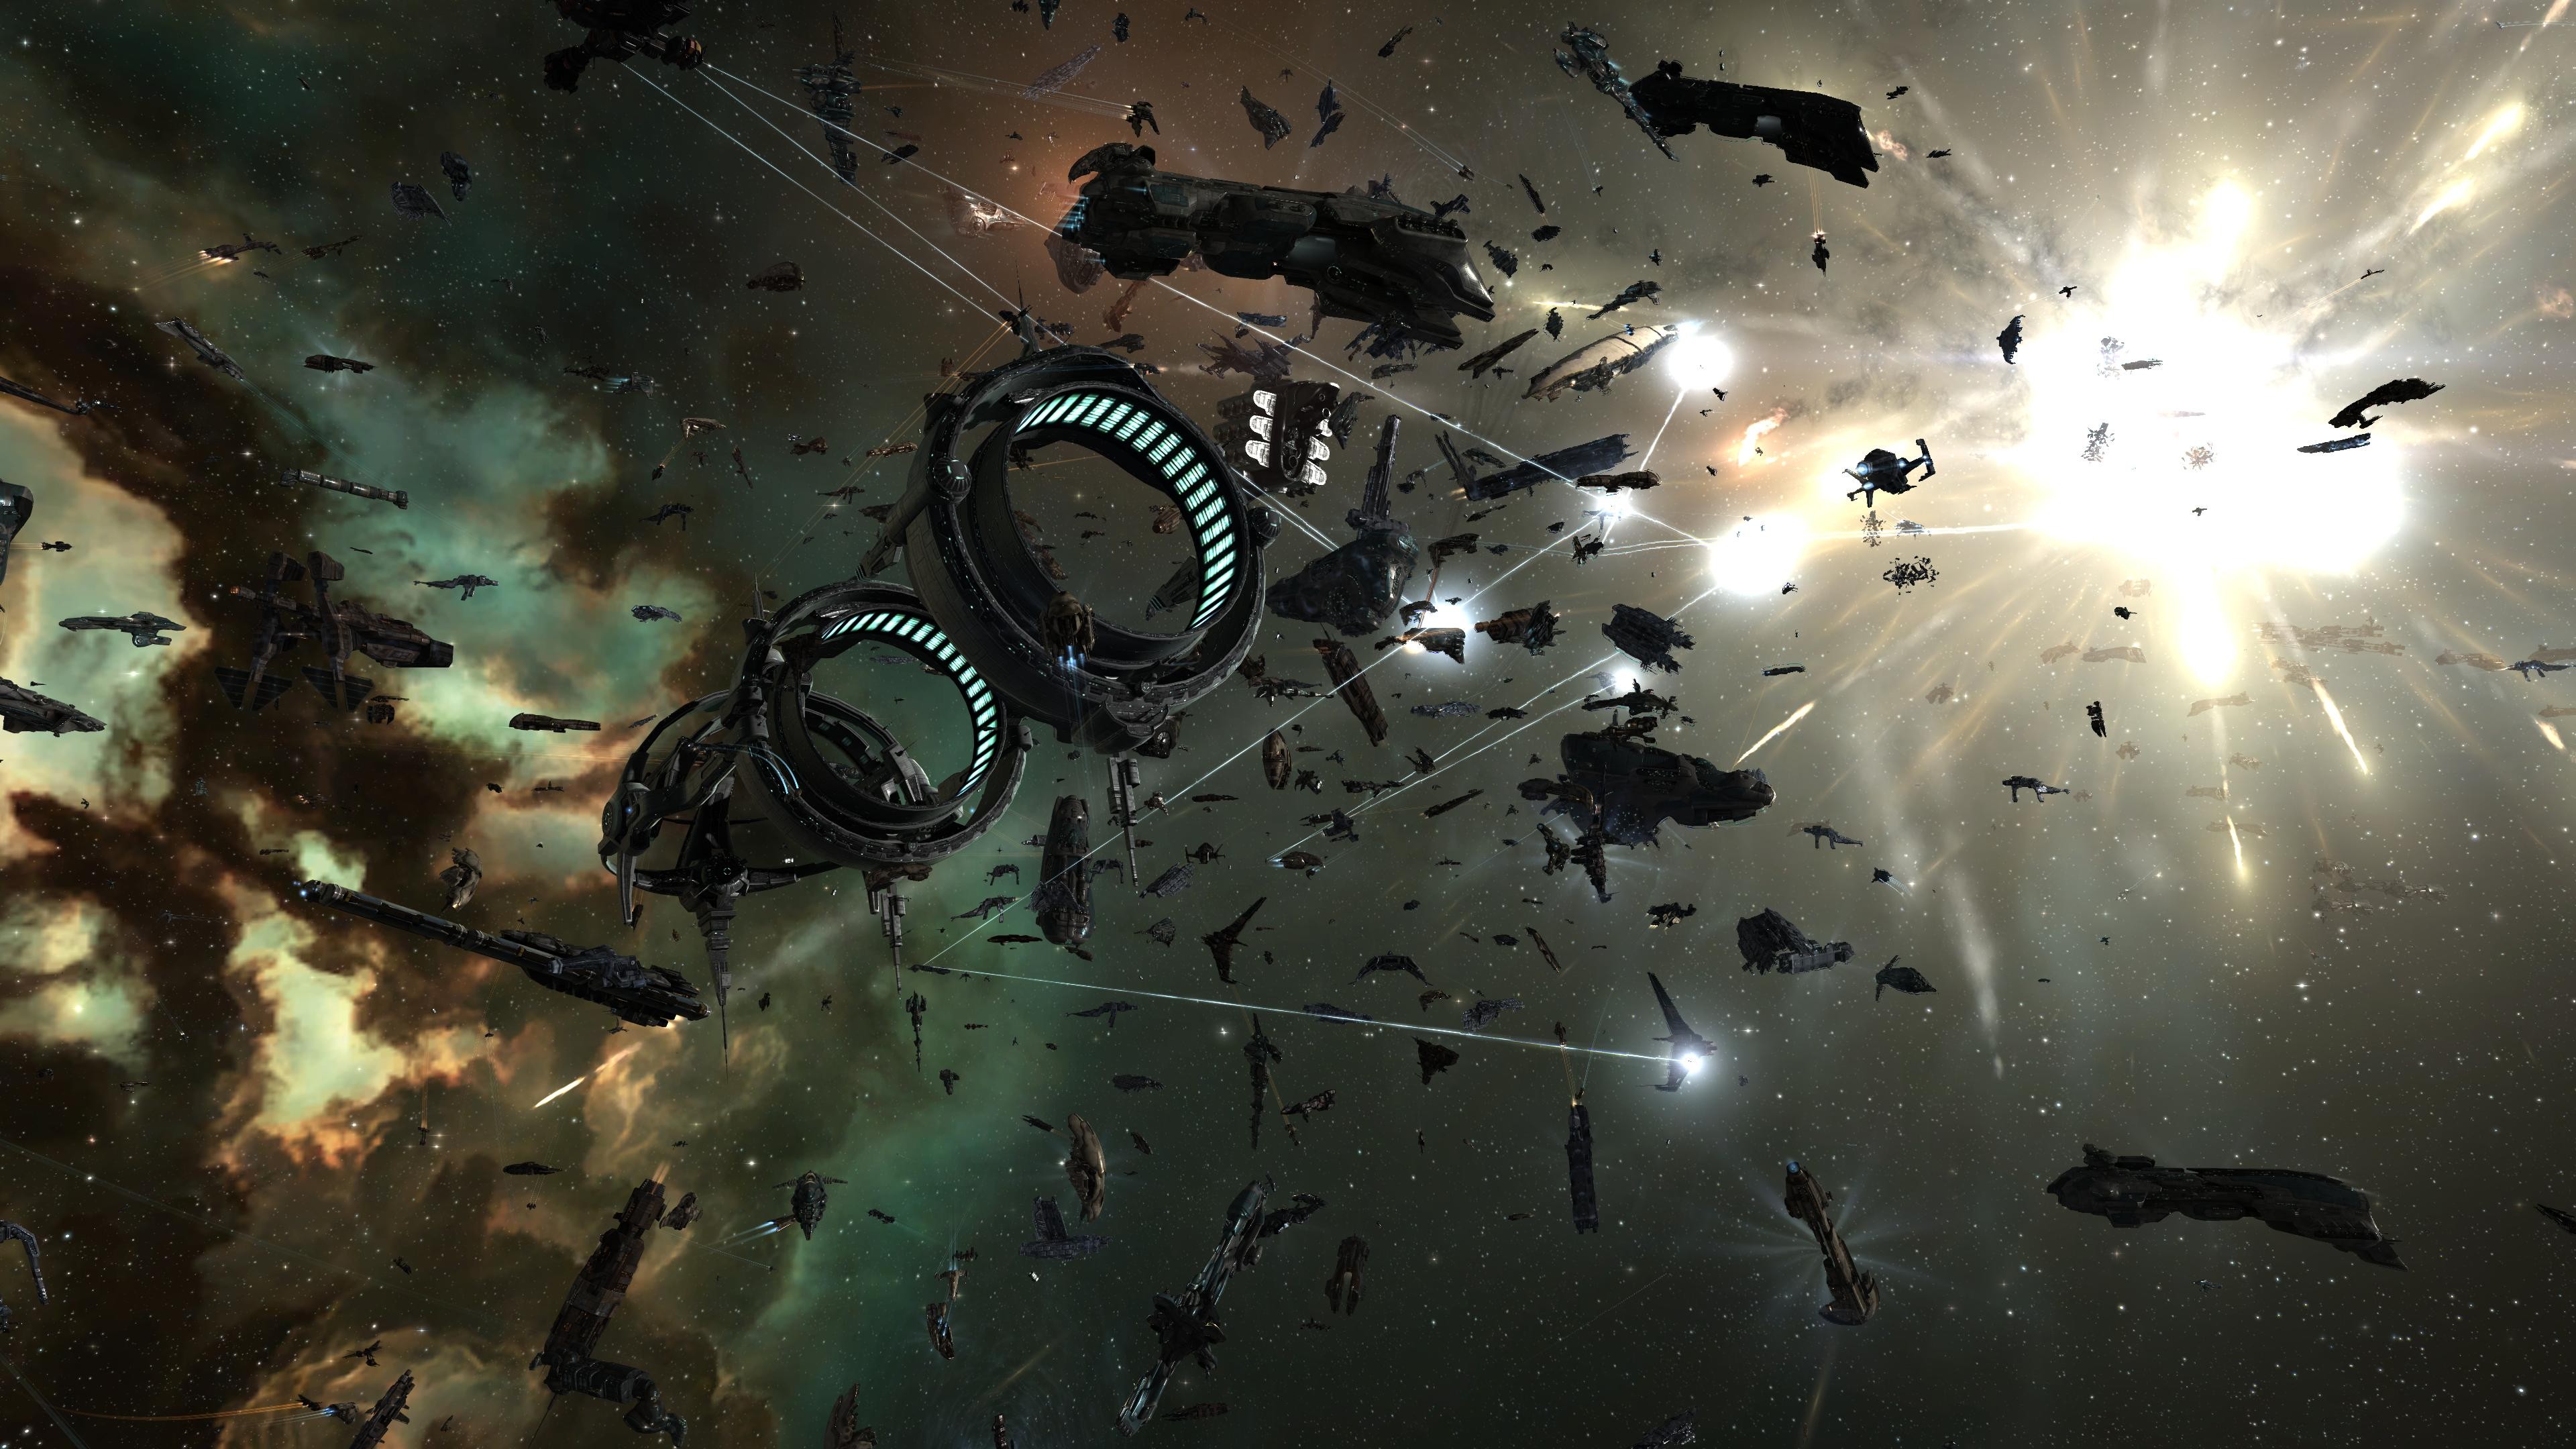 General 3840x2160 space spaceship space battle video games EVE Online PC gaming science fiction